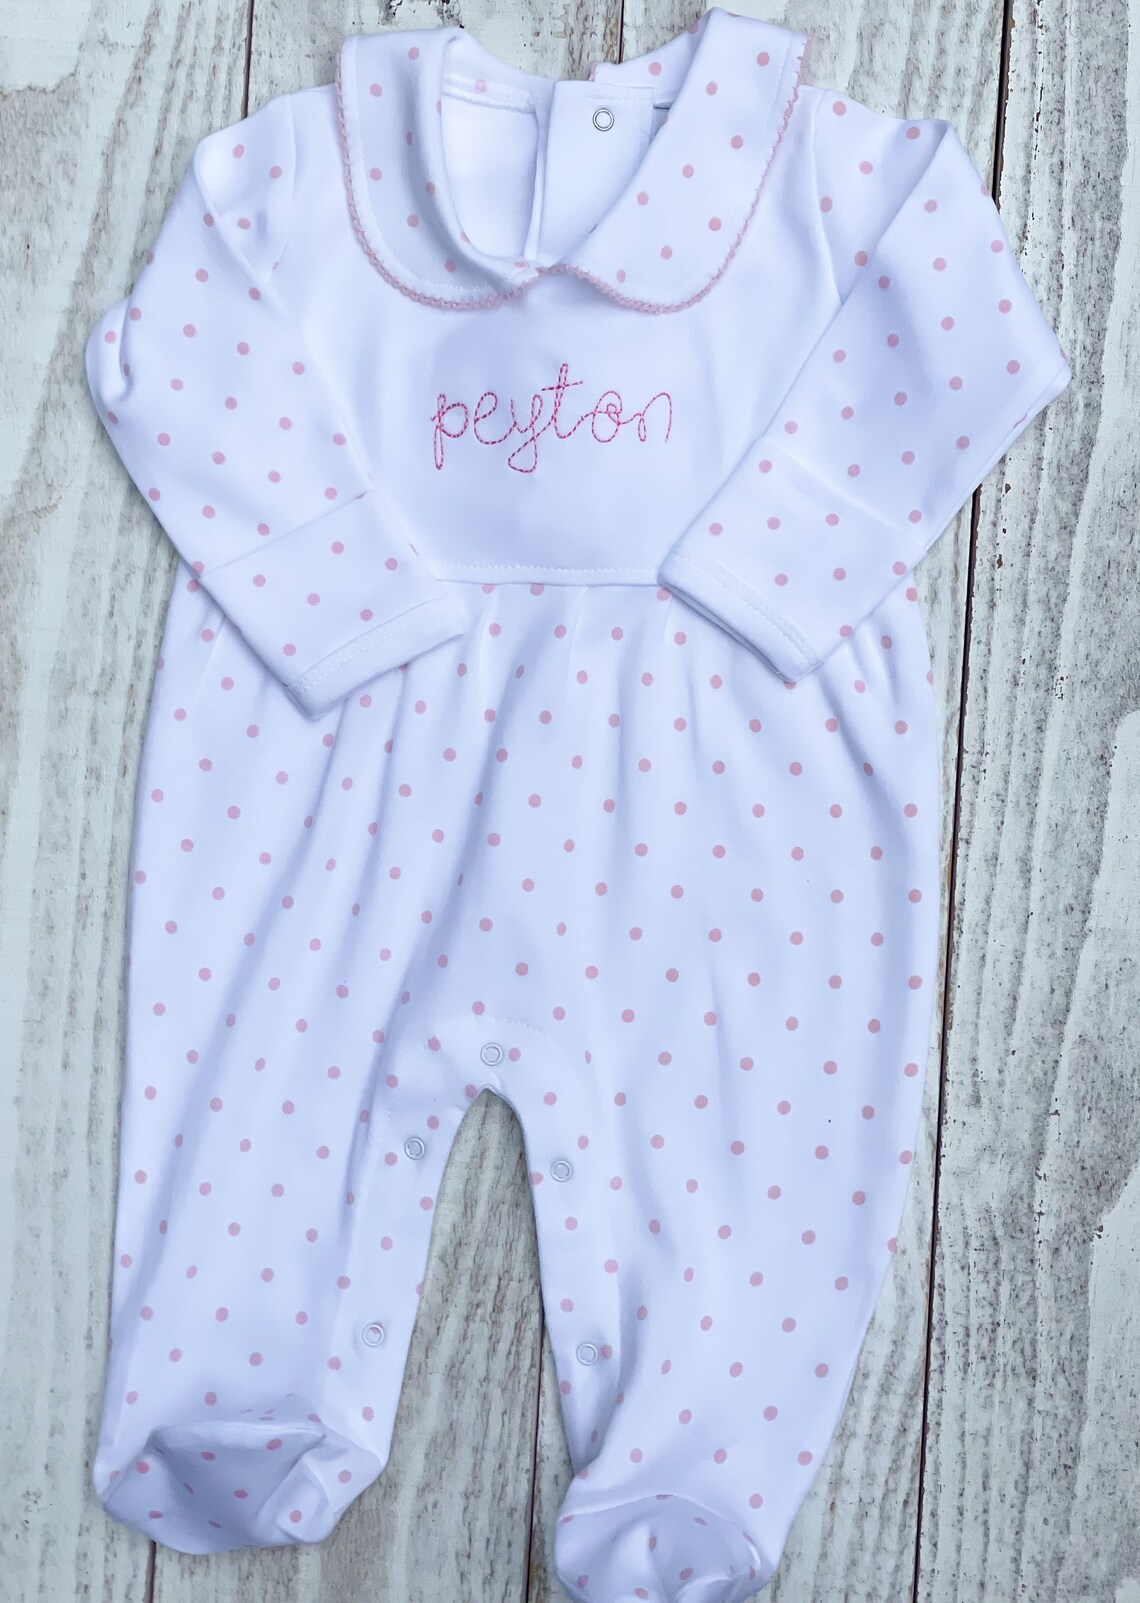 Personalized Baby Girl Outfit Picot Collar Polka Dots-baby - Etsy